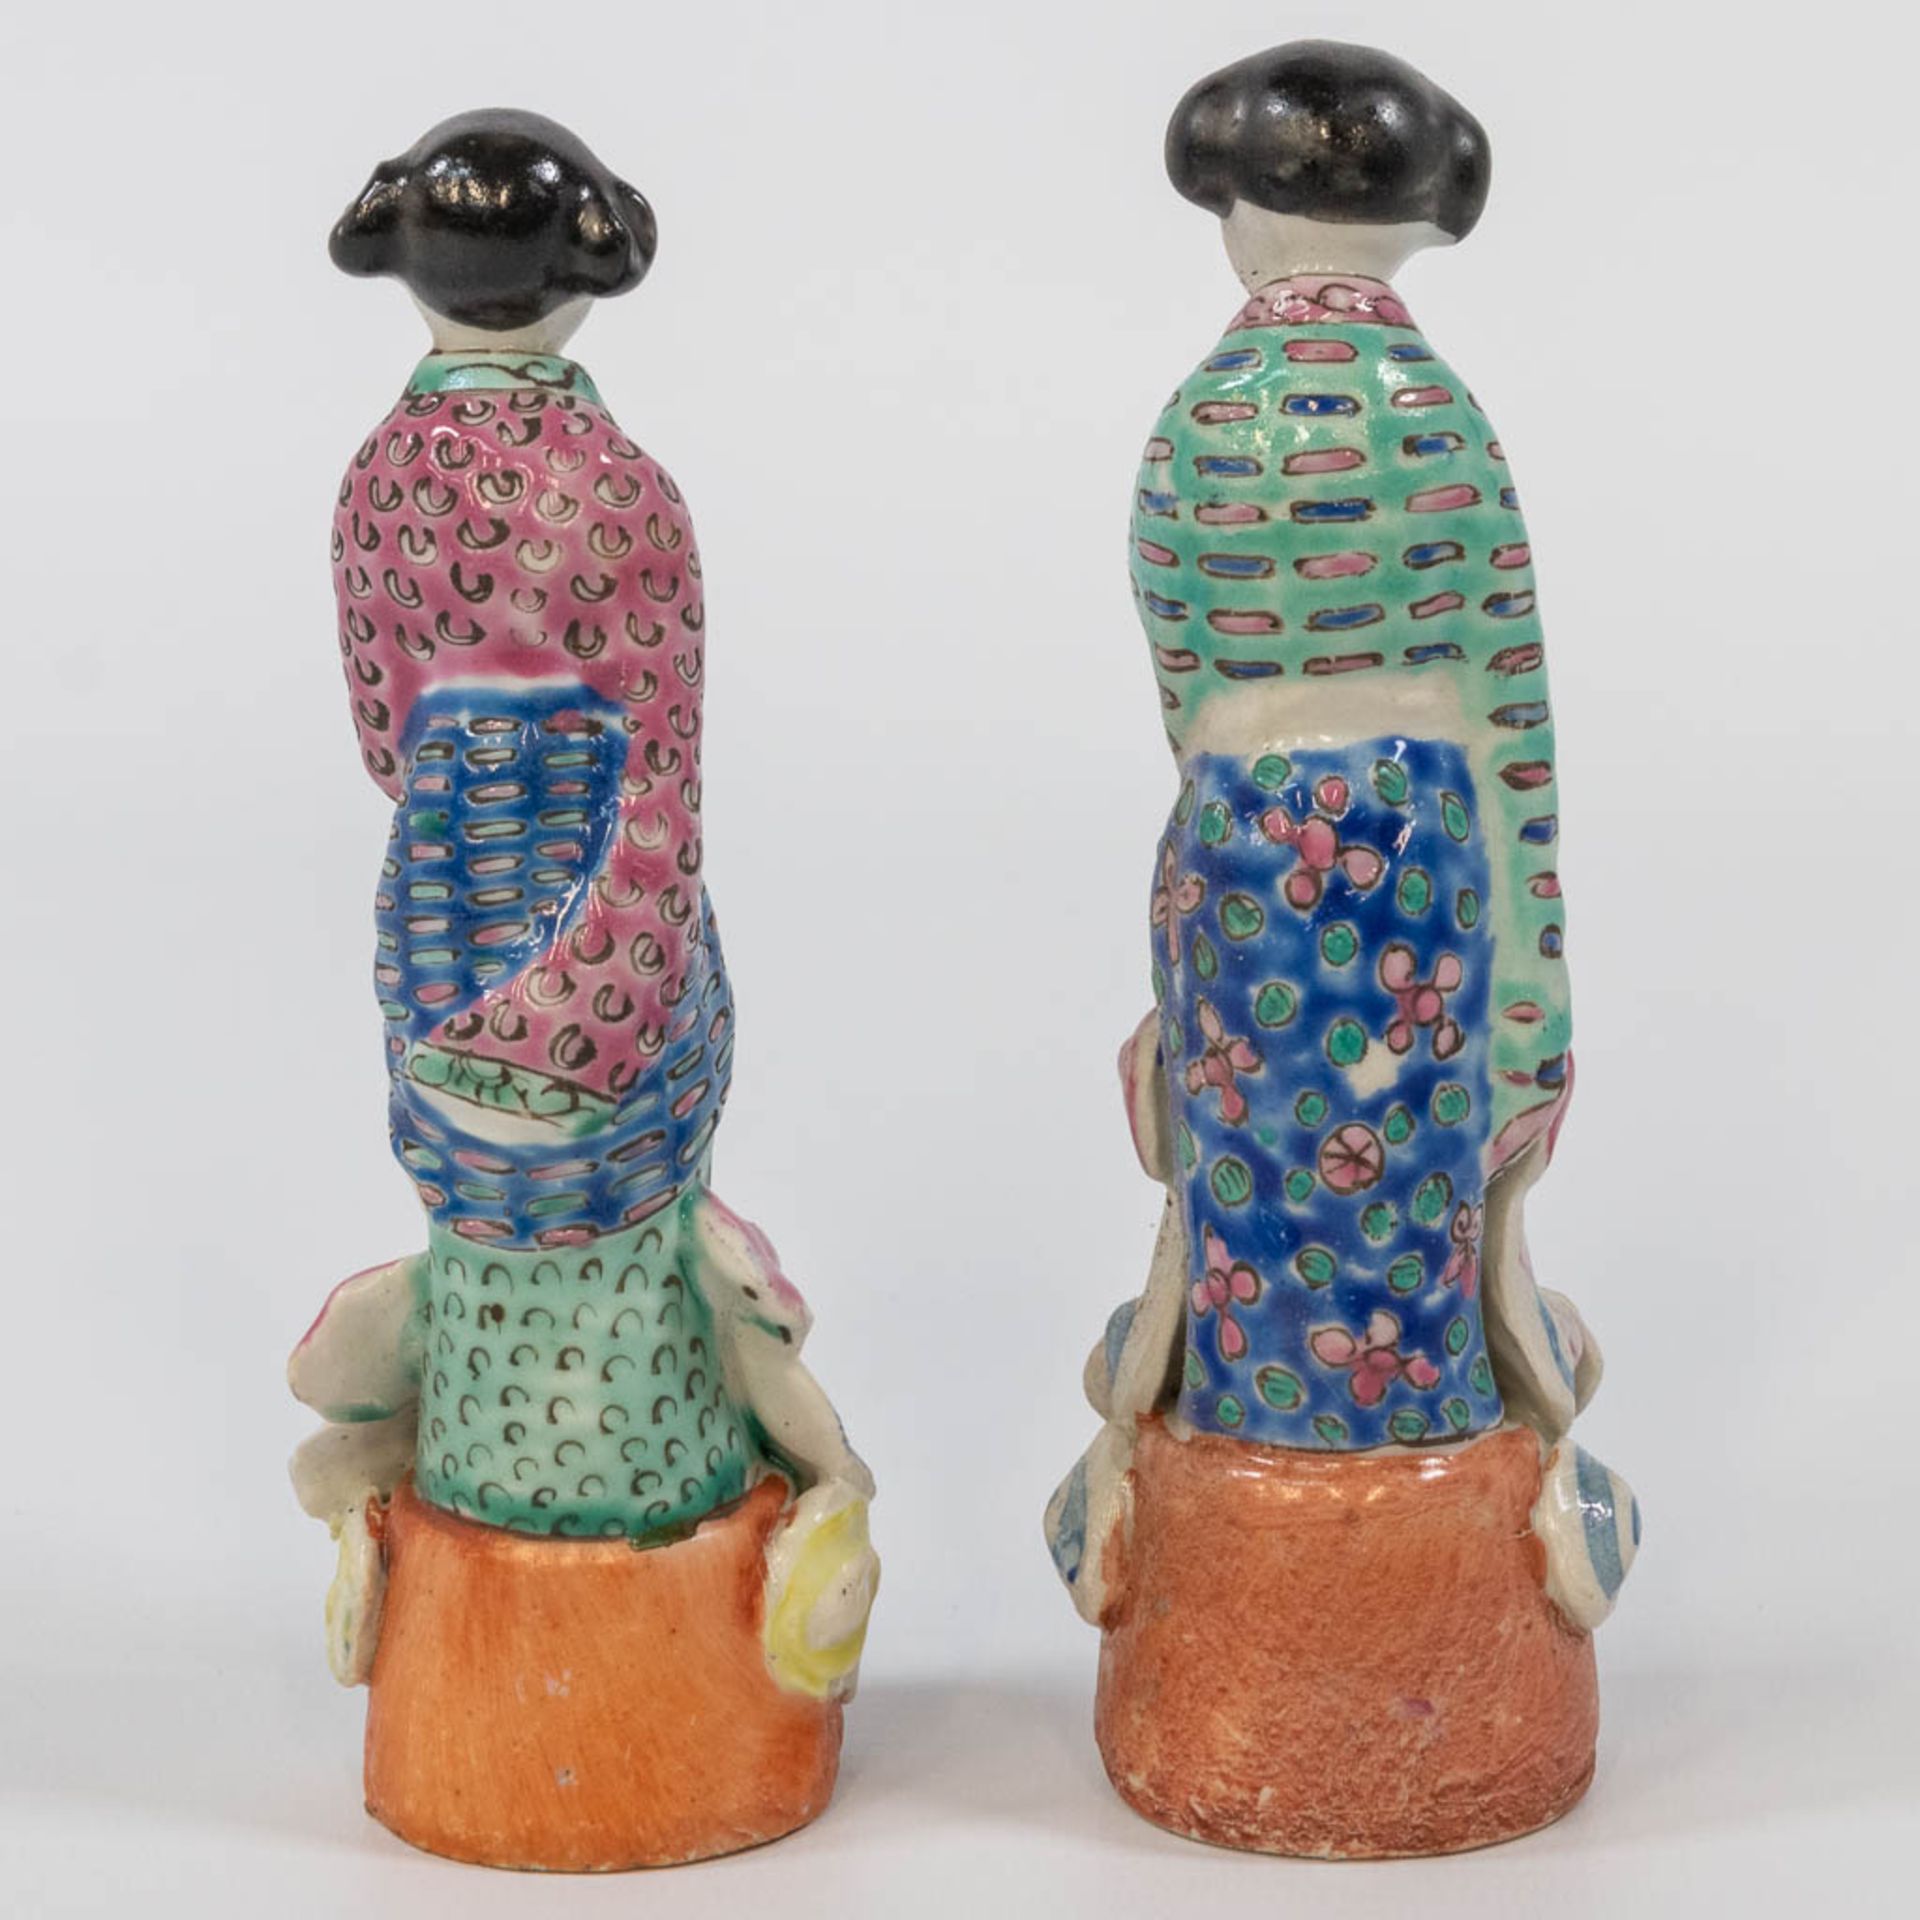 A collection of 13 Chinese and Japanese statues made of porcelain and ceramics. (10 x 11 x 25 cm) - Bild 17 aus 17